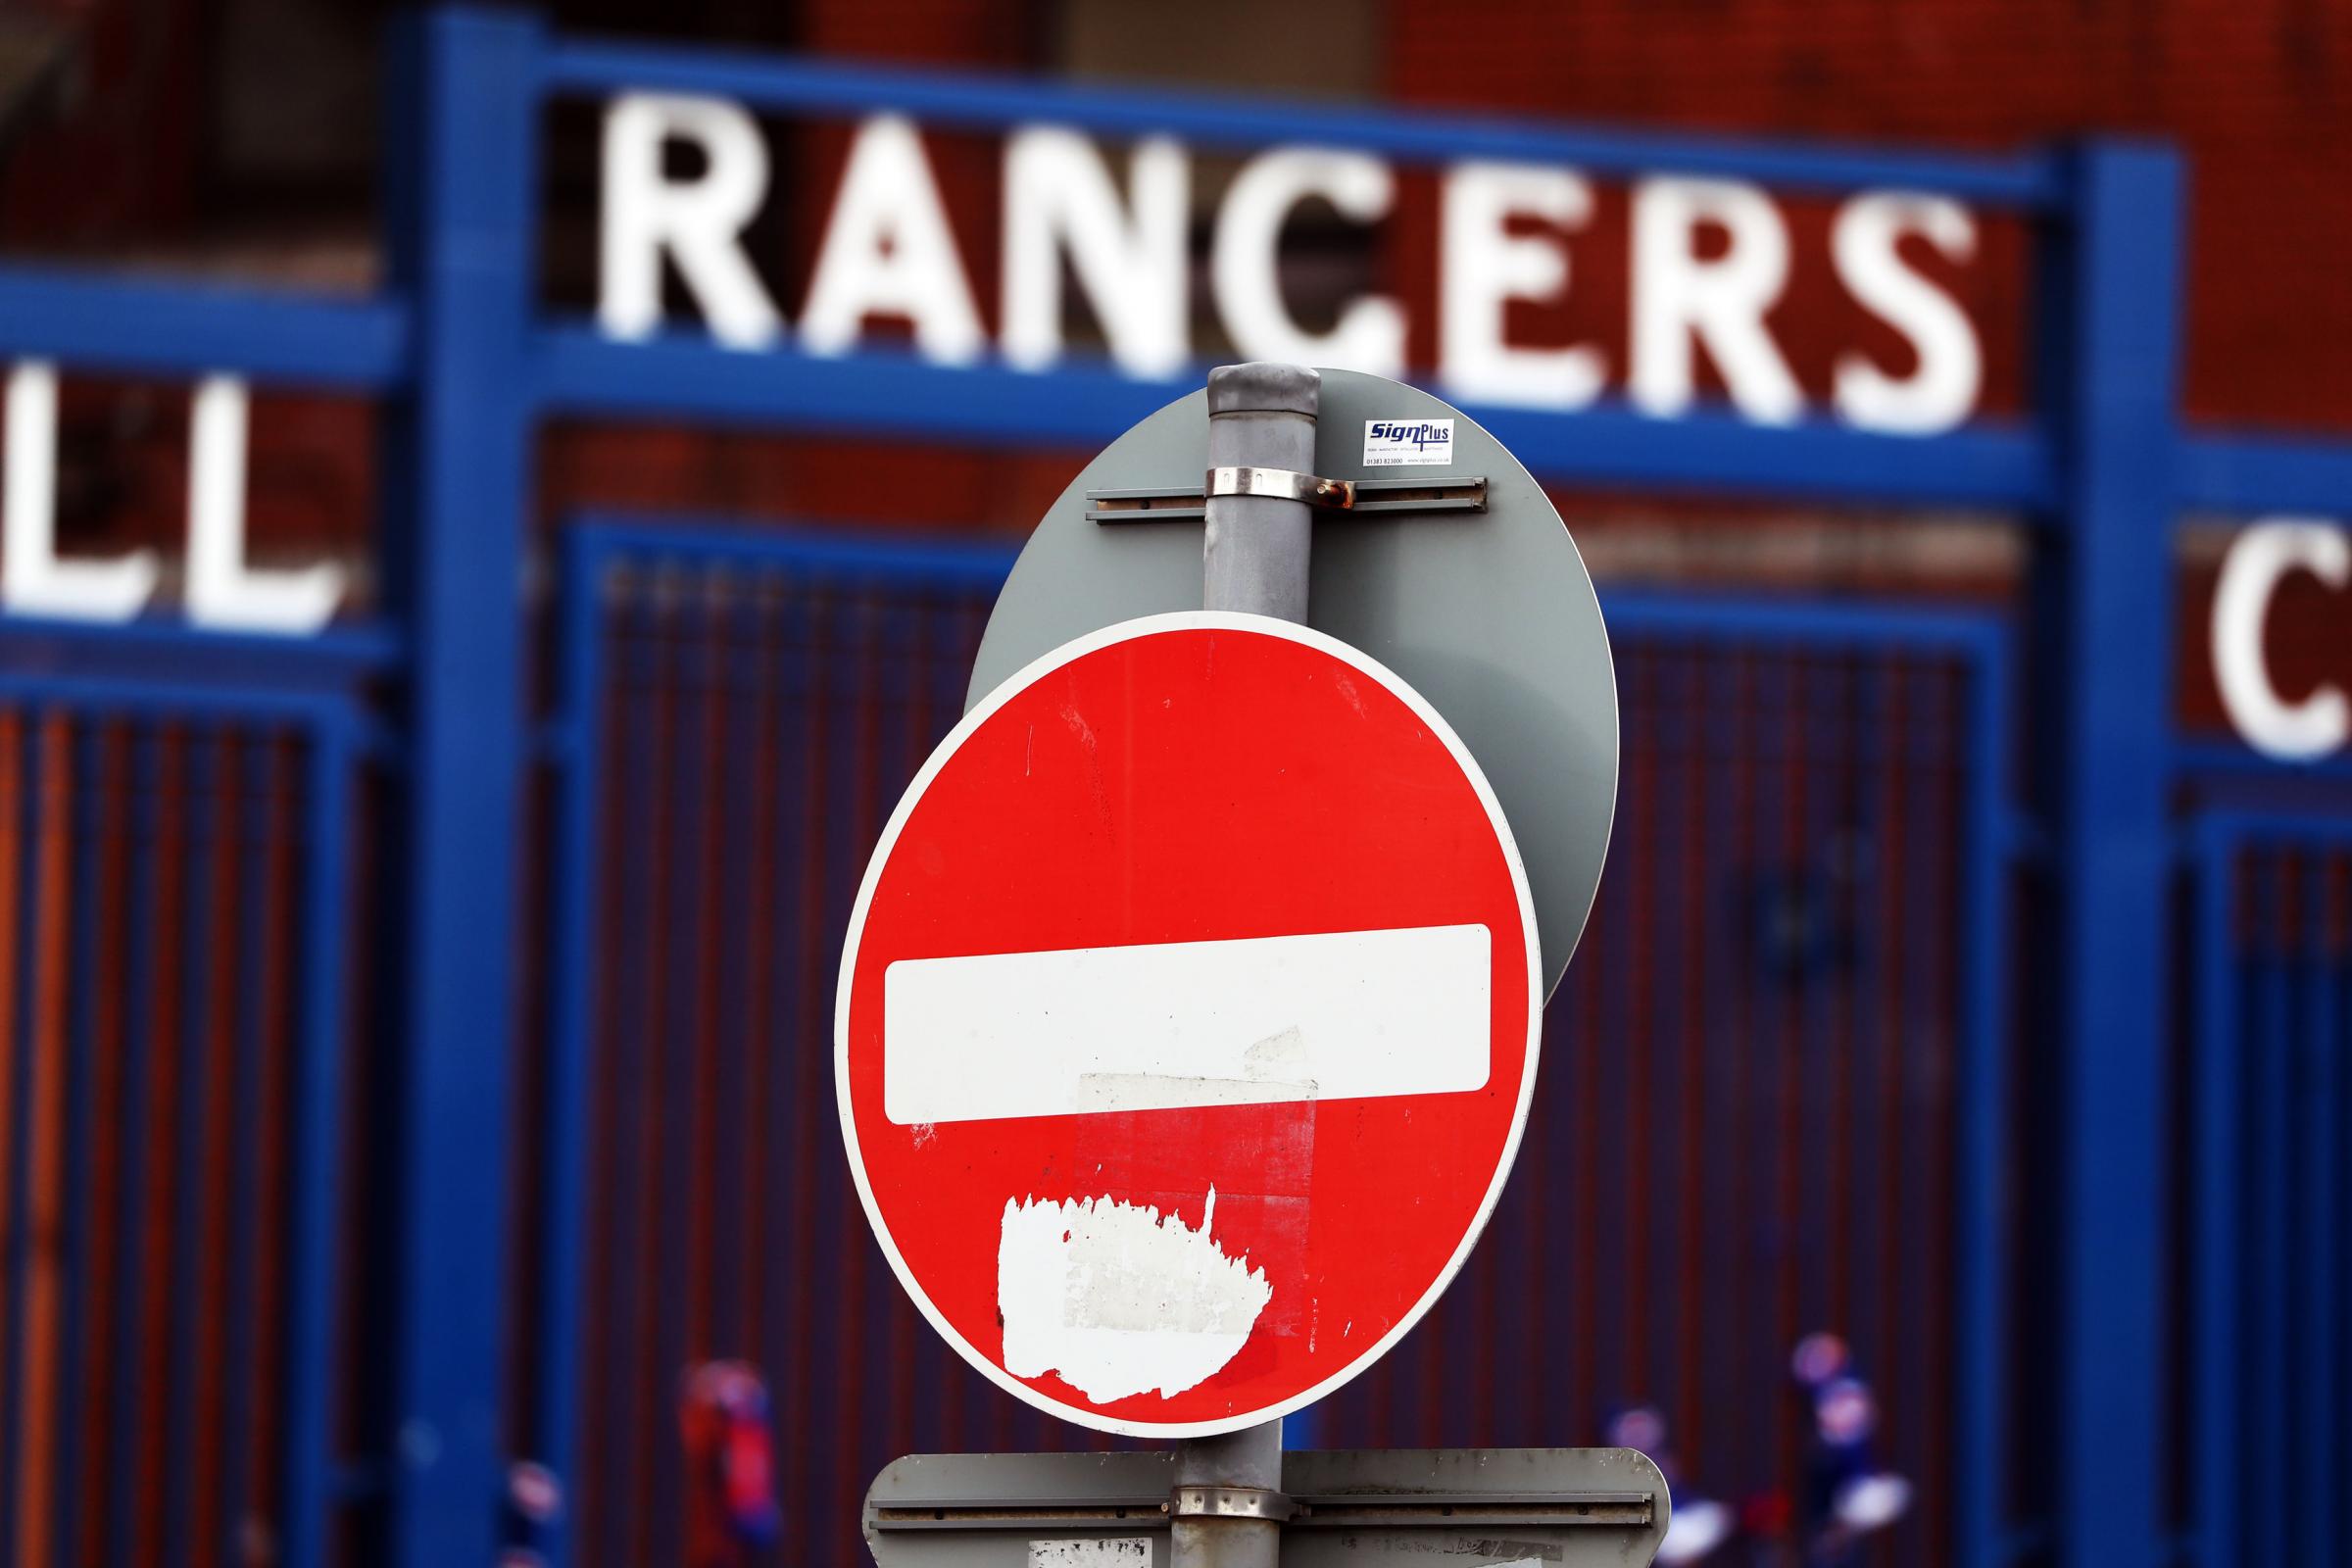 Rangers' requisition needs another 29 clubs to back it to get probe - if the SPFL deem it competent